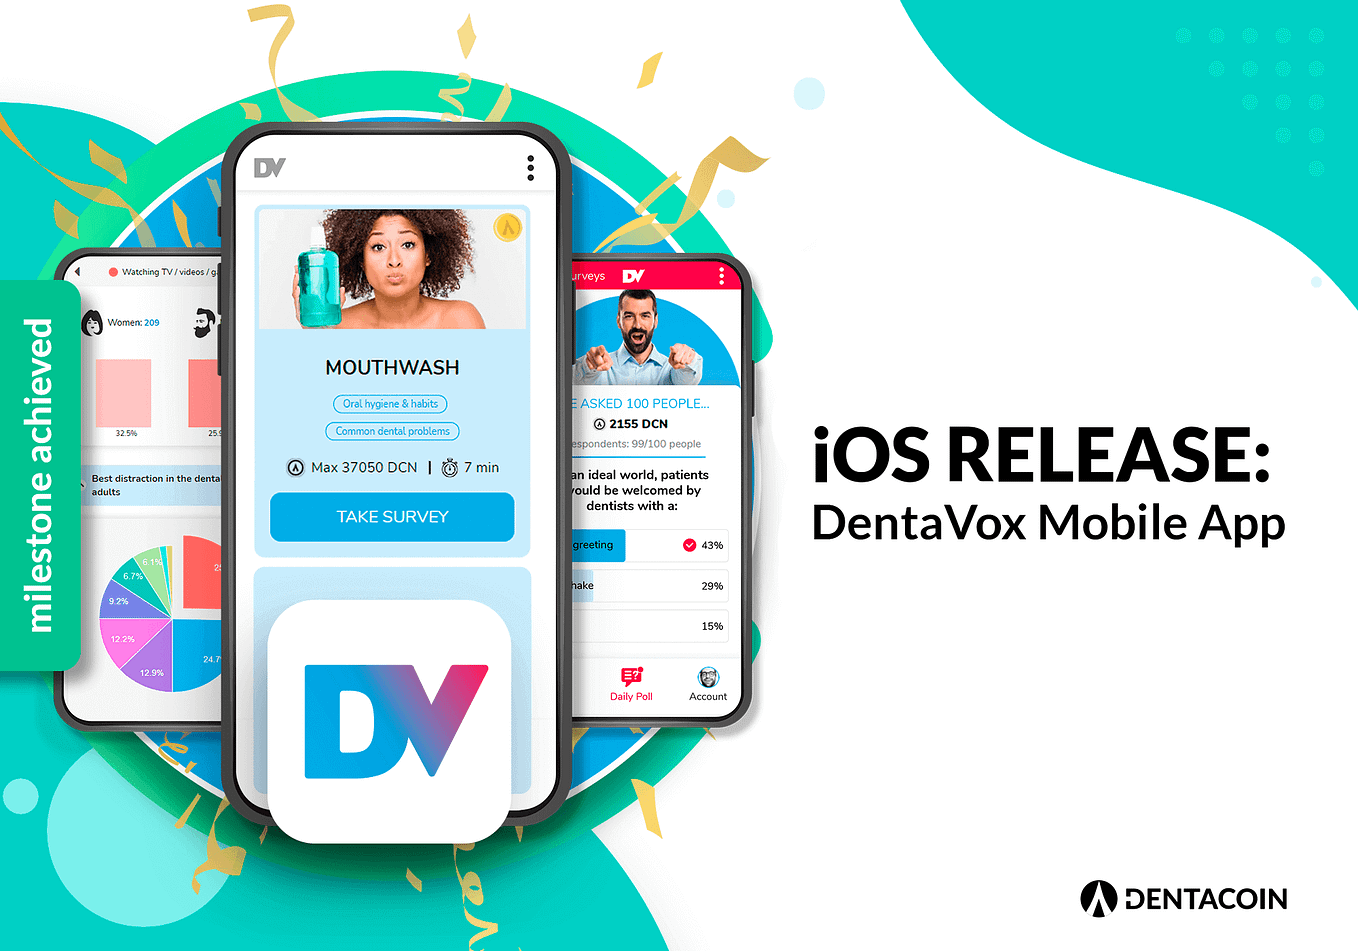 DentaVox App: Officially Released for iOS Devices